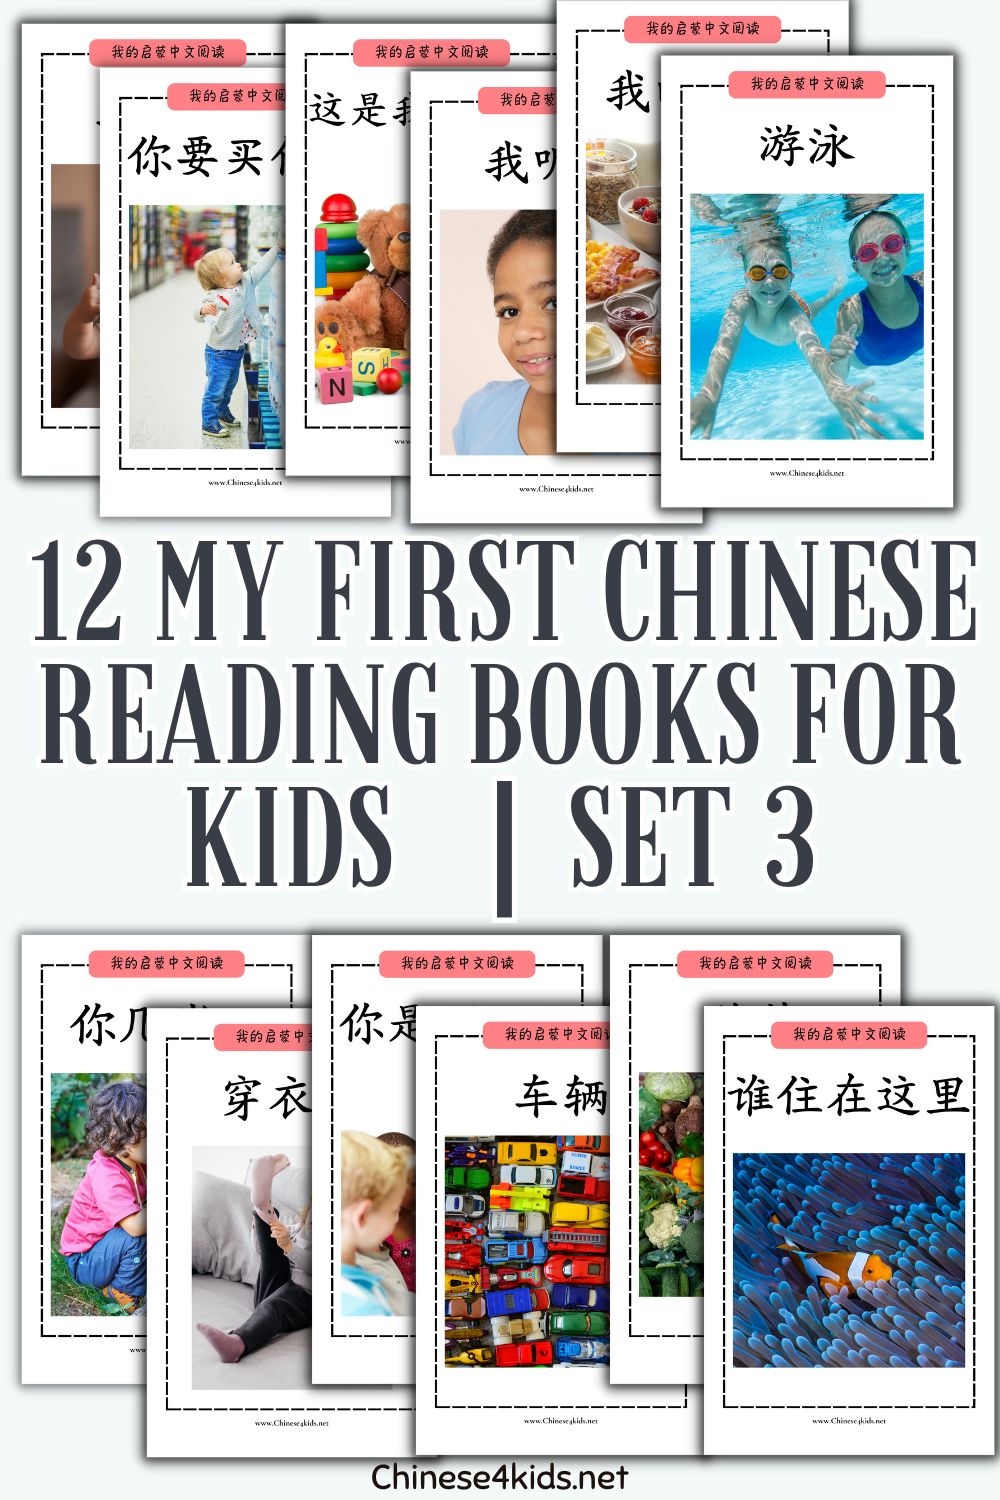 My First Chinese Reading set 3 | book 25-36 of My First Chinese Reading series | Reading books for Chinese students